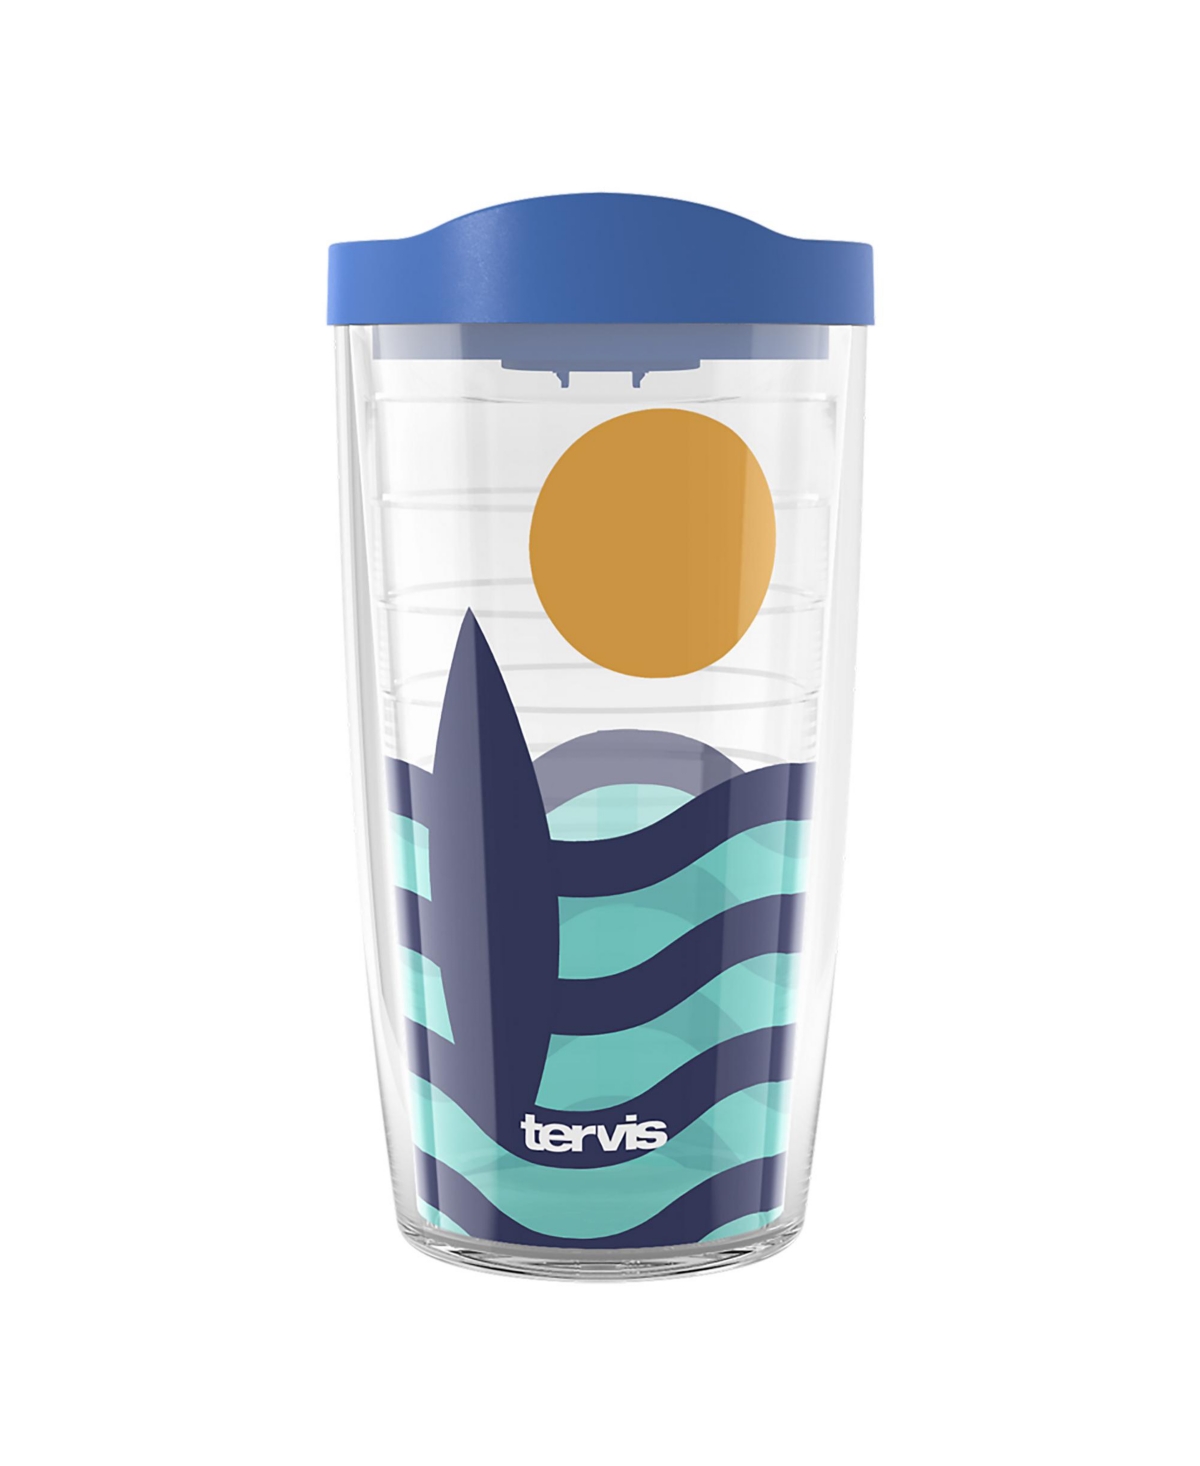 Tervis Tumbler Tervis Surf High Tide Made In Usa Double Walled Insulated Tumbler Travel Cup Keeps Drinks Cold & Hot In Open Miscellaneous